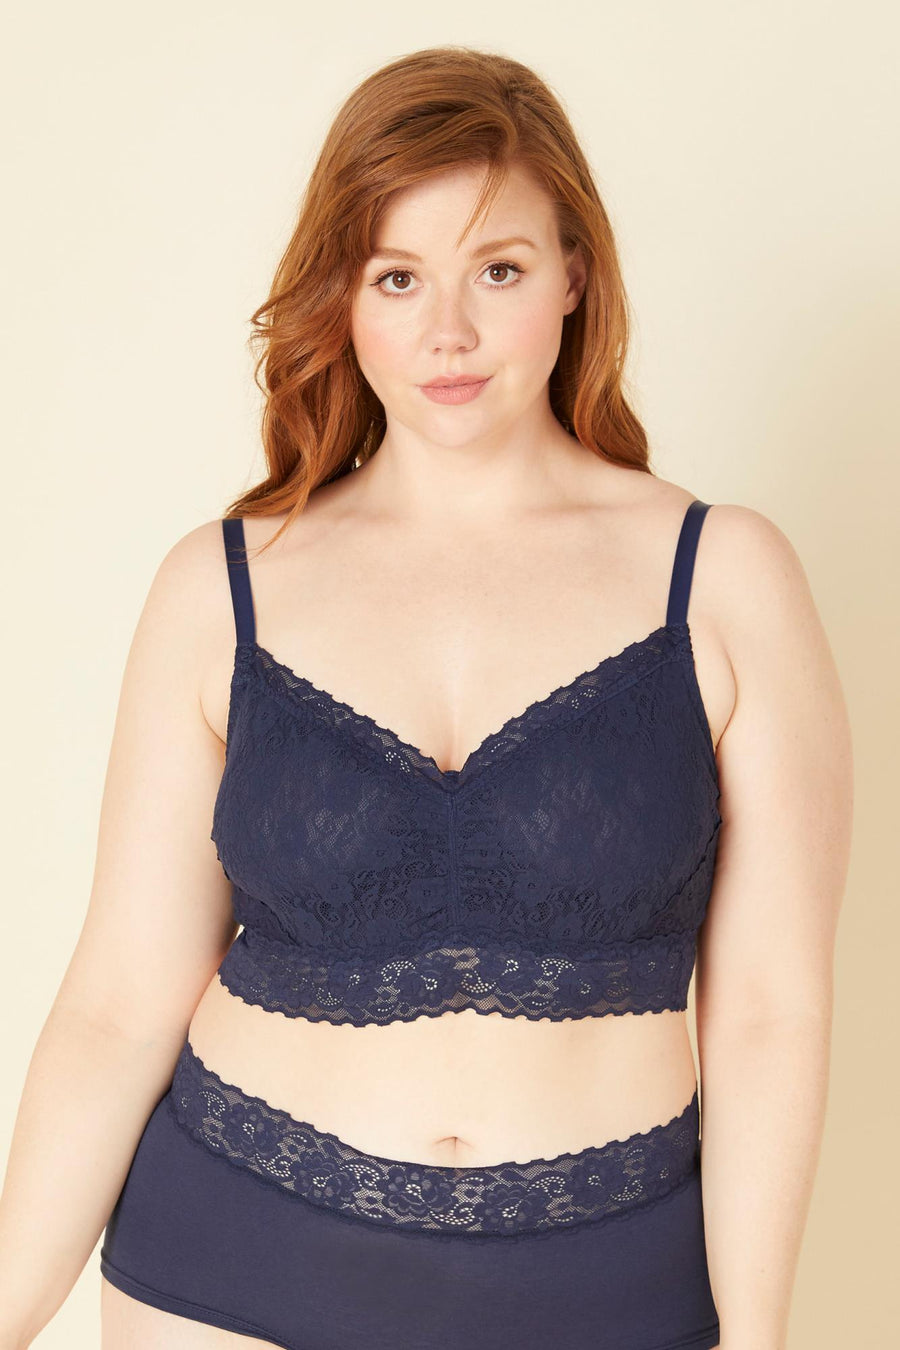 Blue Bralette - Cosabella Amore Adore Extended Bralette